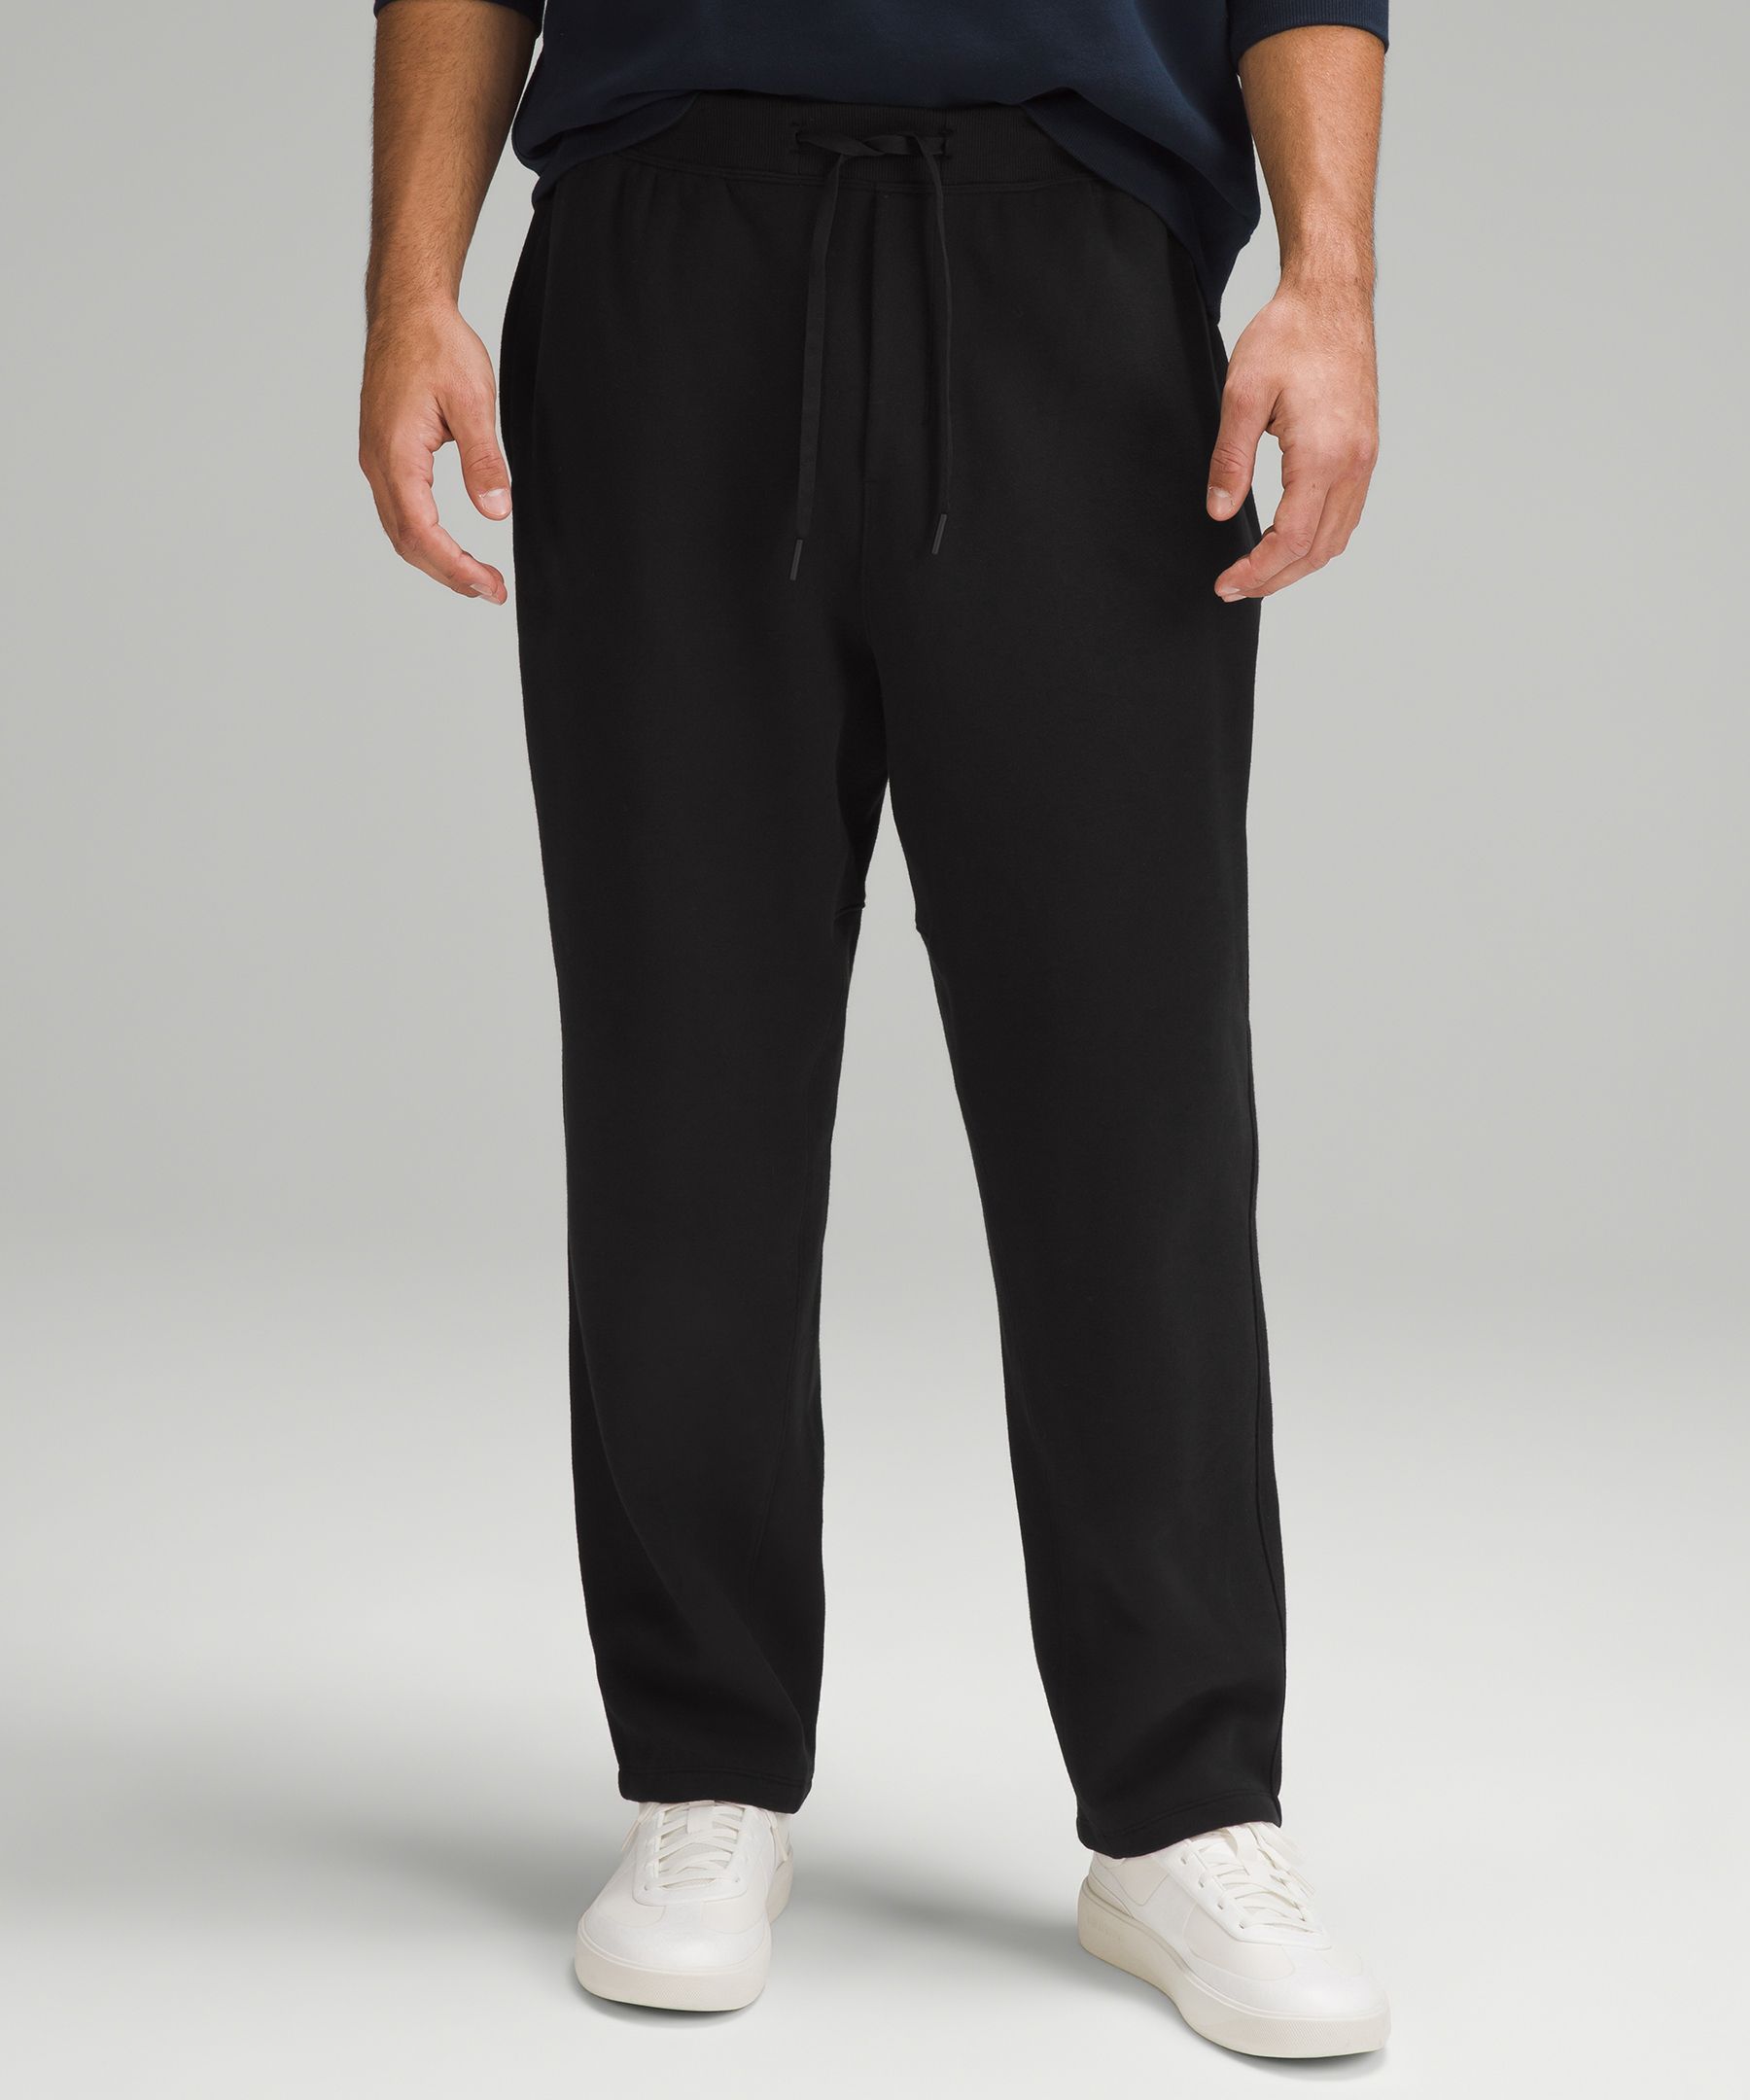 Stretch Woven Training Pants for Tall Men